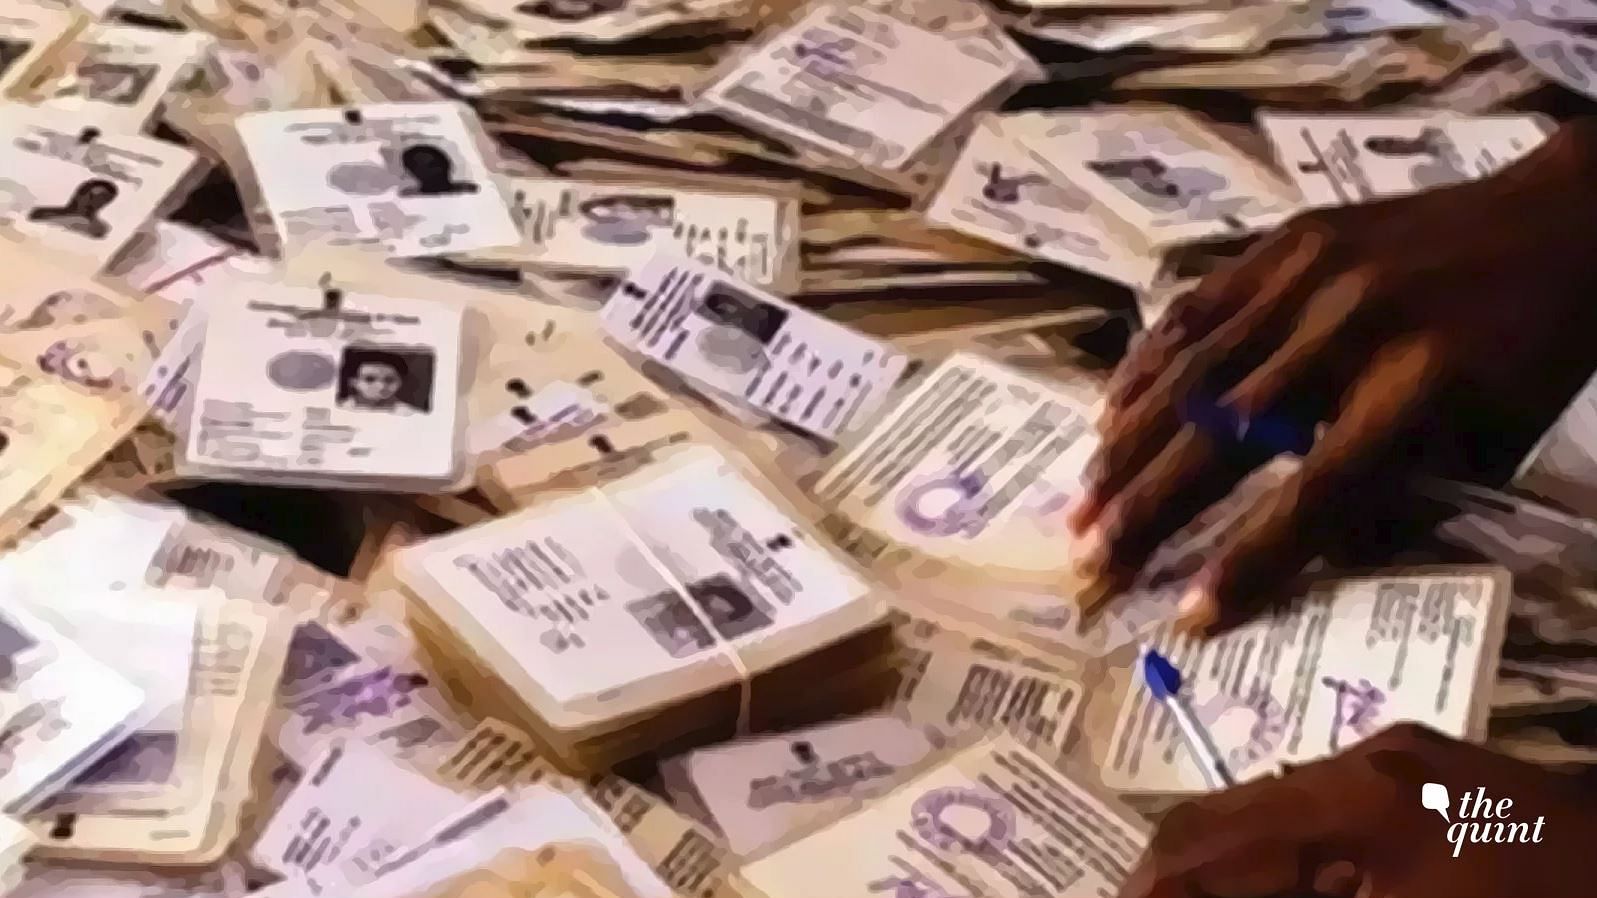 The EC says it has recovered nearly 10,000 original voter ID cards from a Bengaluru apartment.